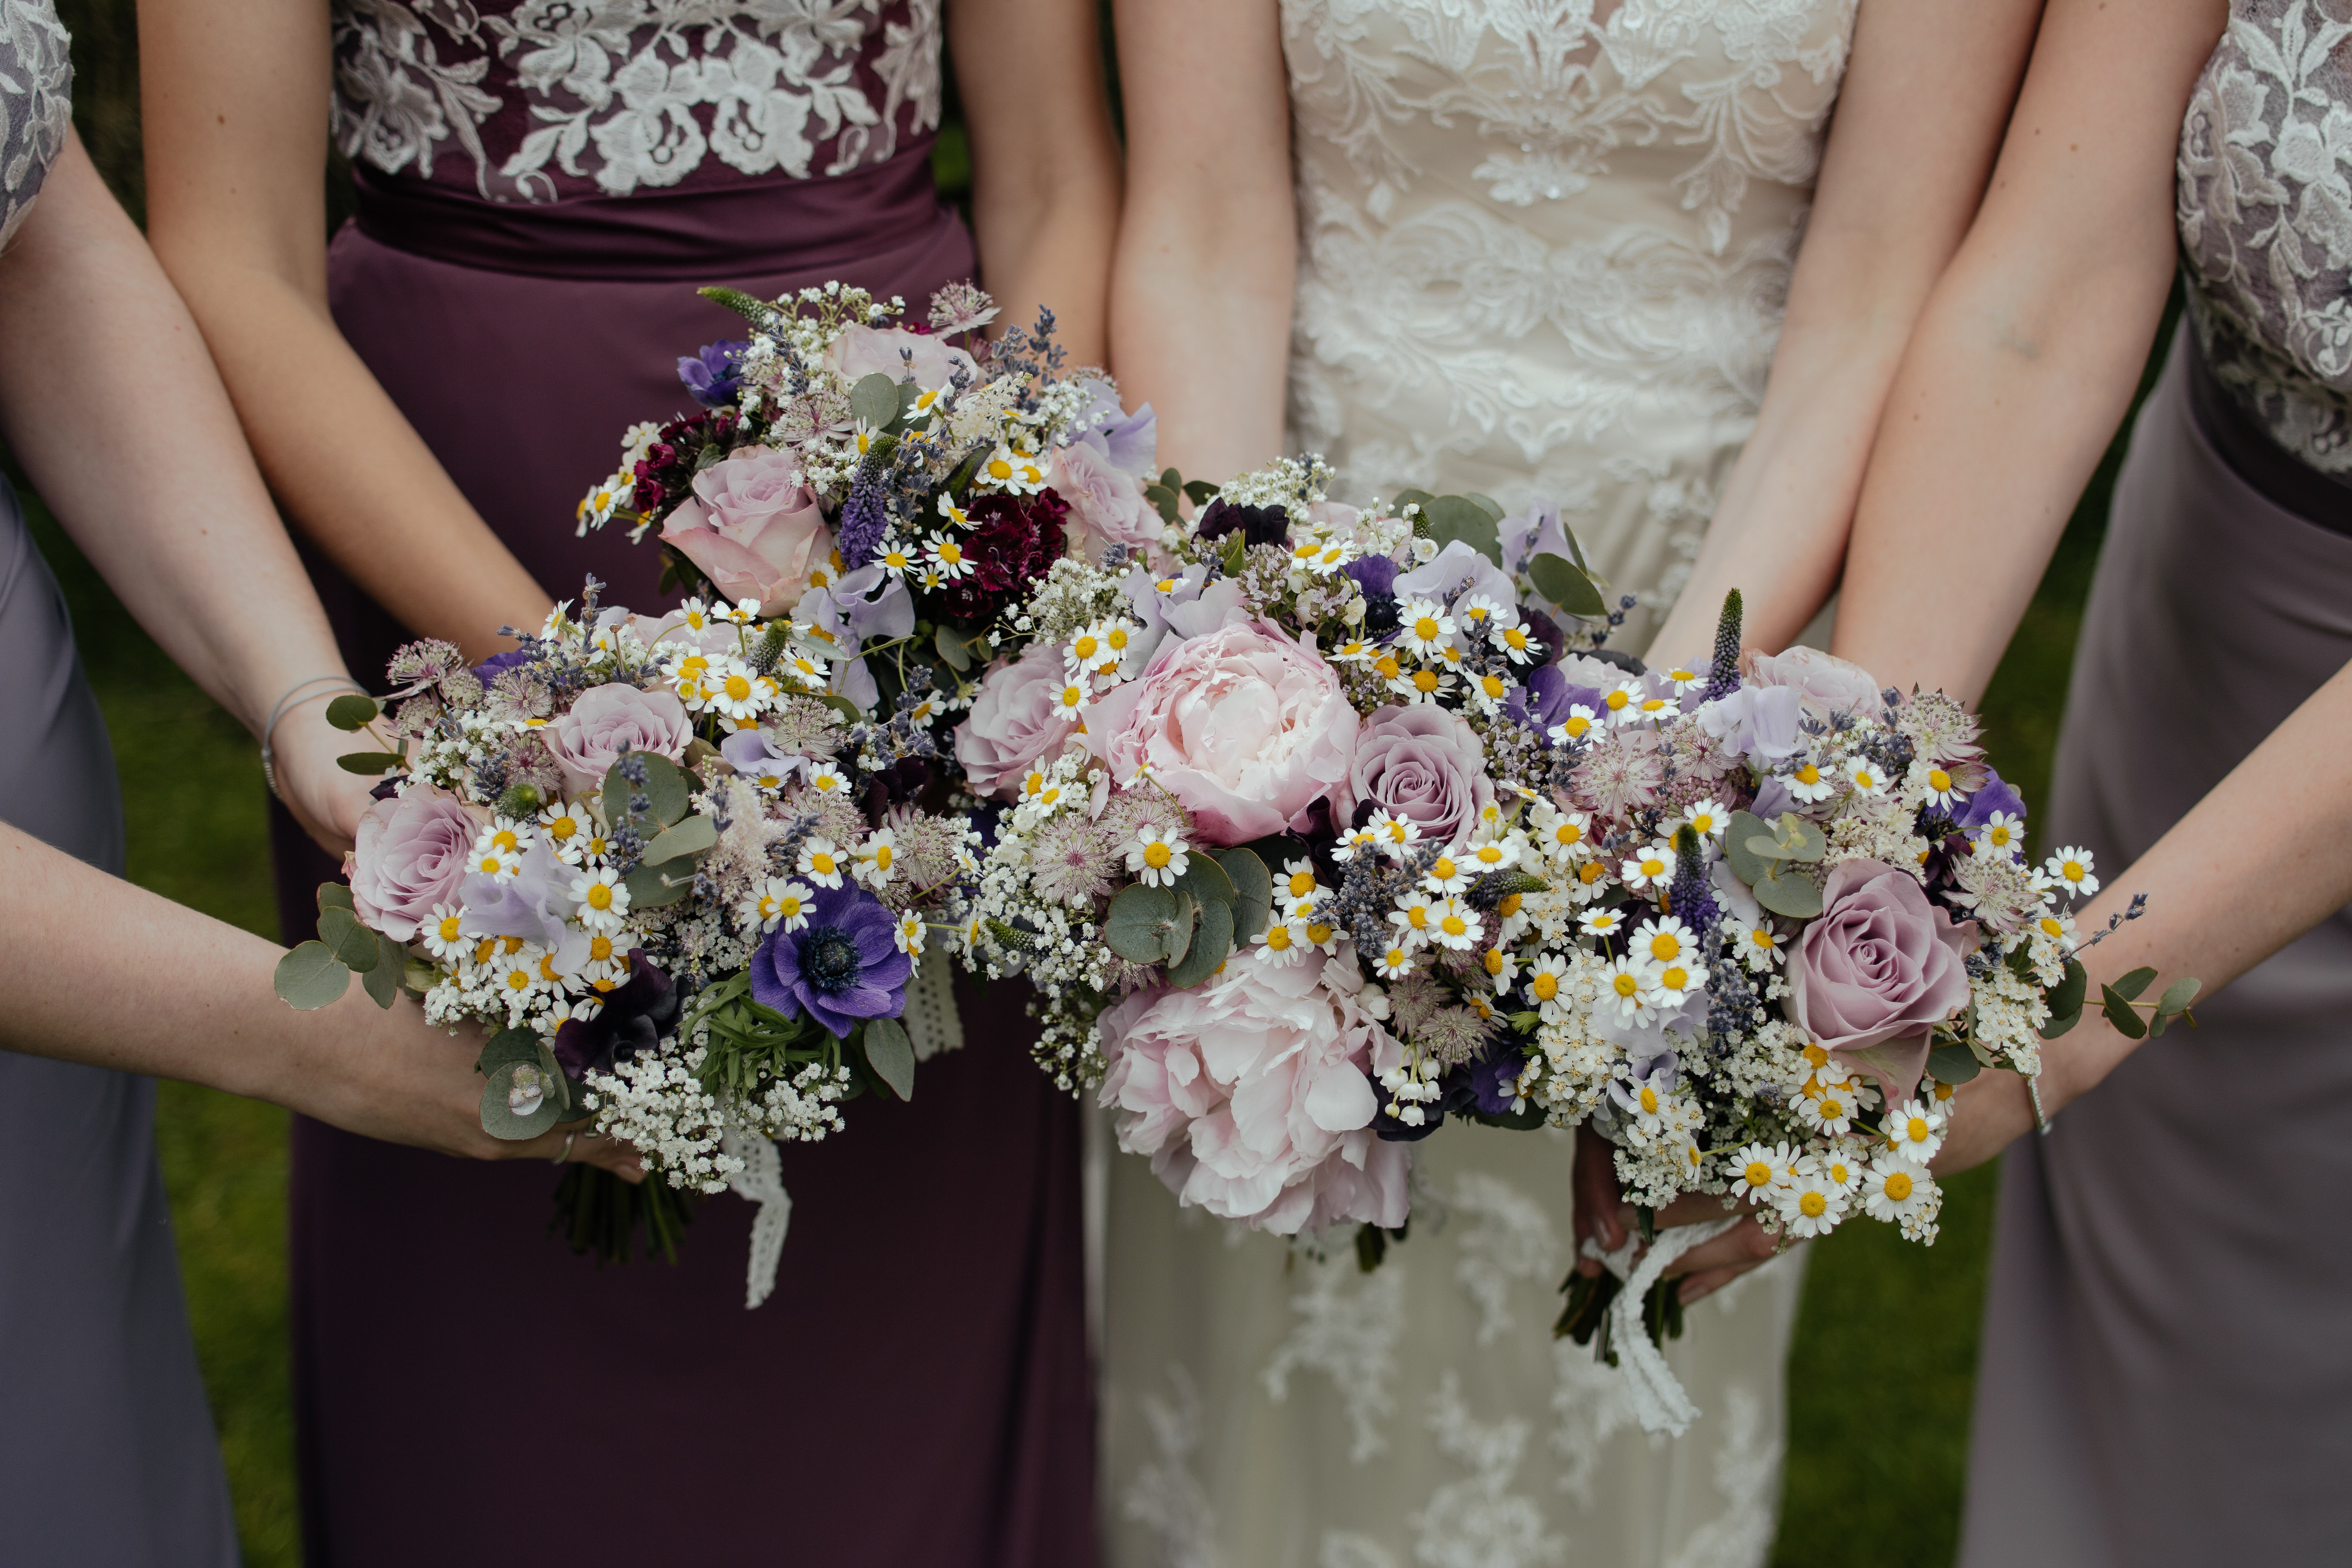 How Many Bridesmaids Should You Have? | Zola